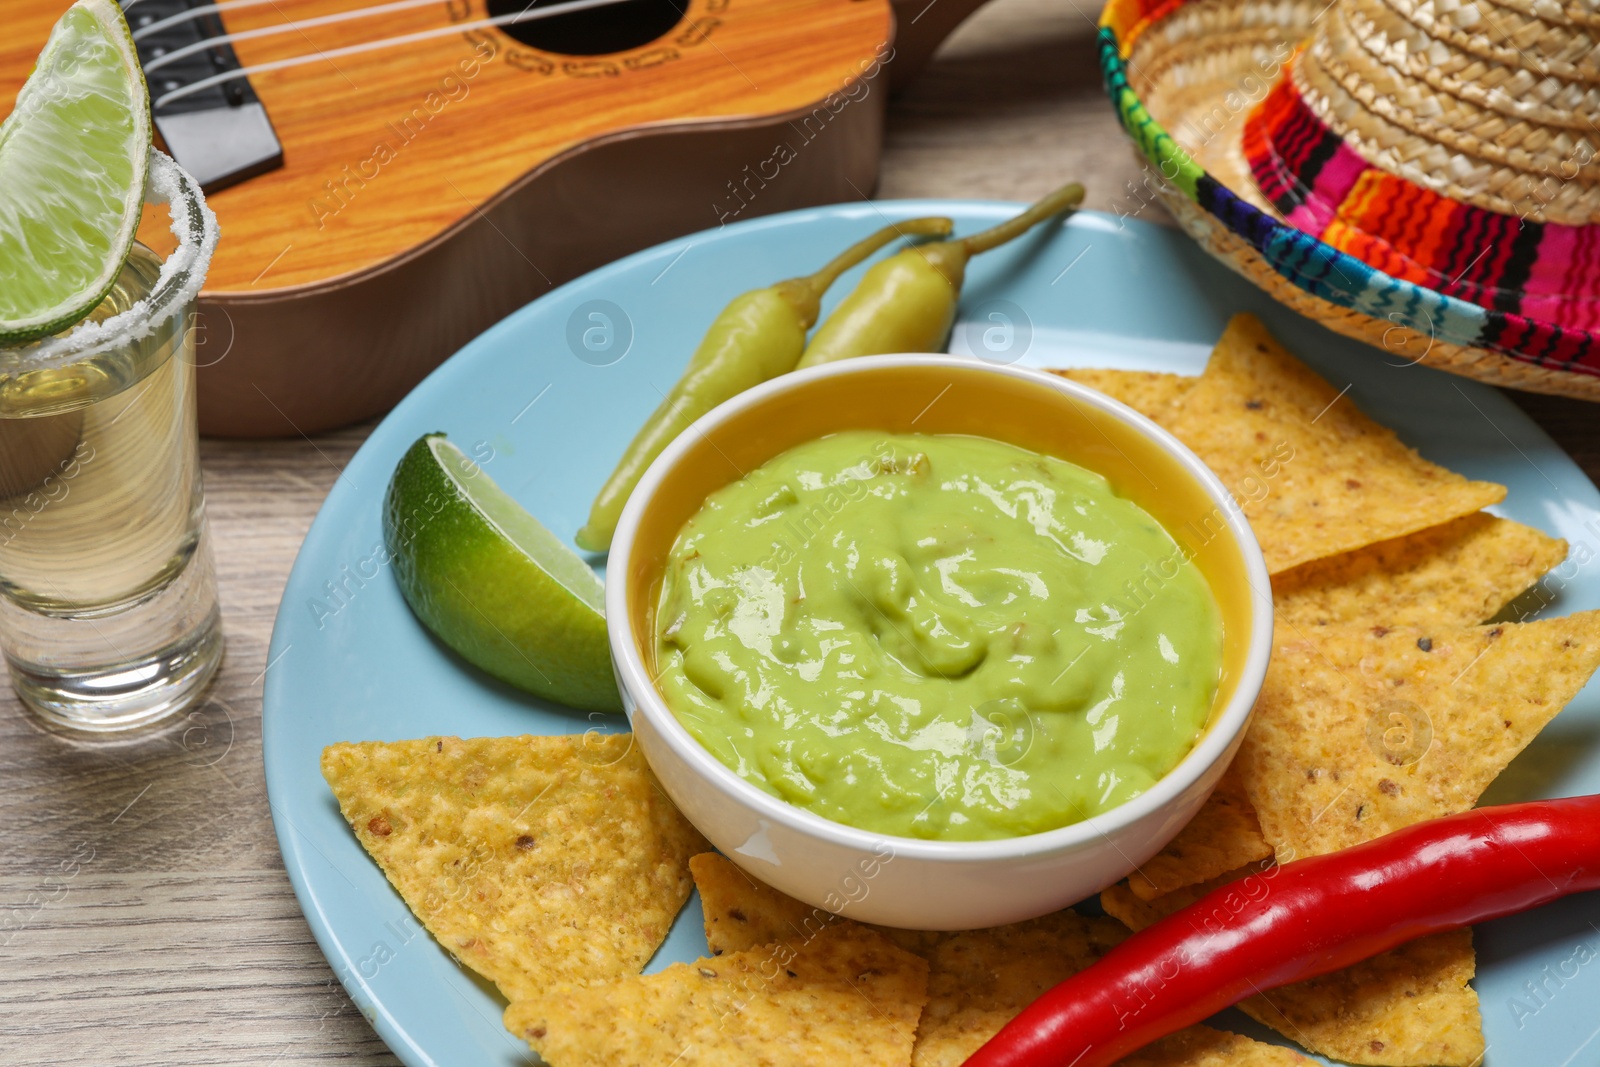 Photo of Guacamole, nachos chips, tequila, Mexican sombrero hat and ukulele on wooden table